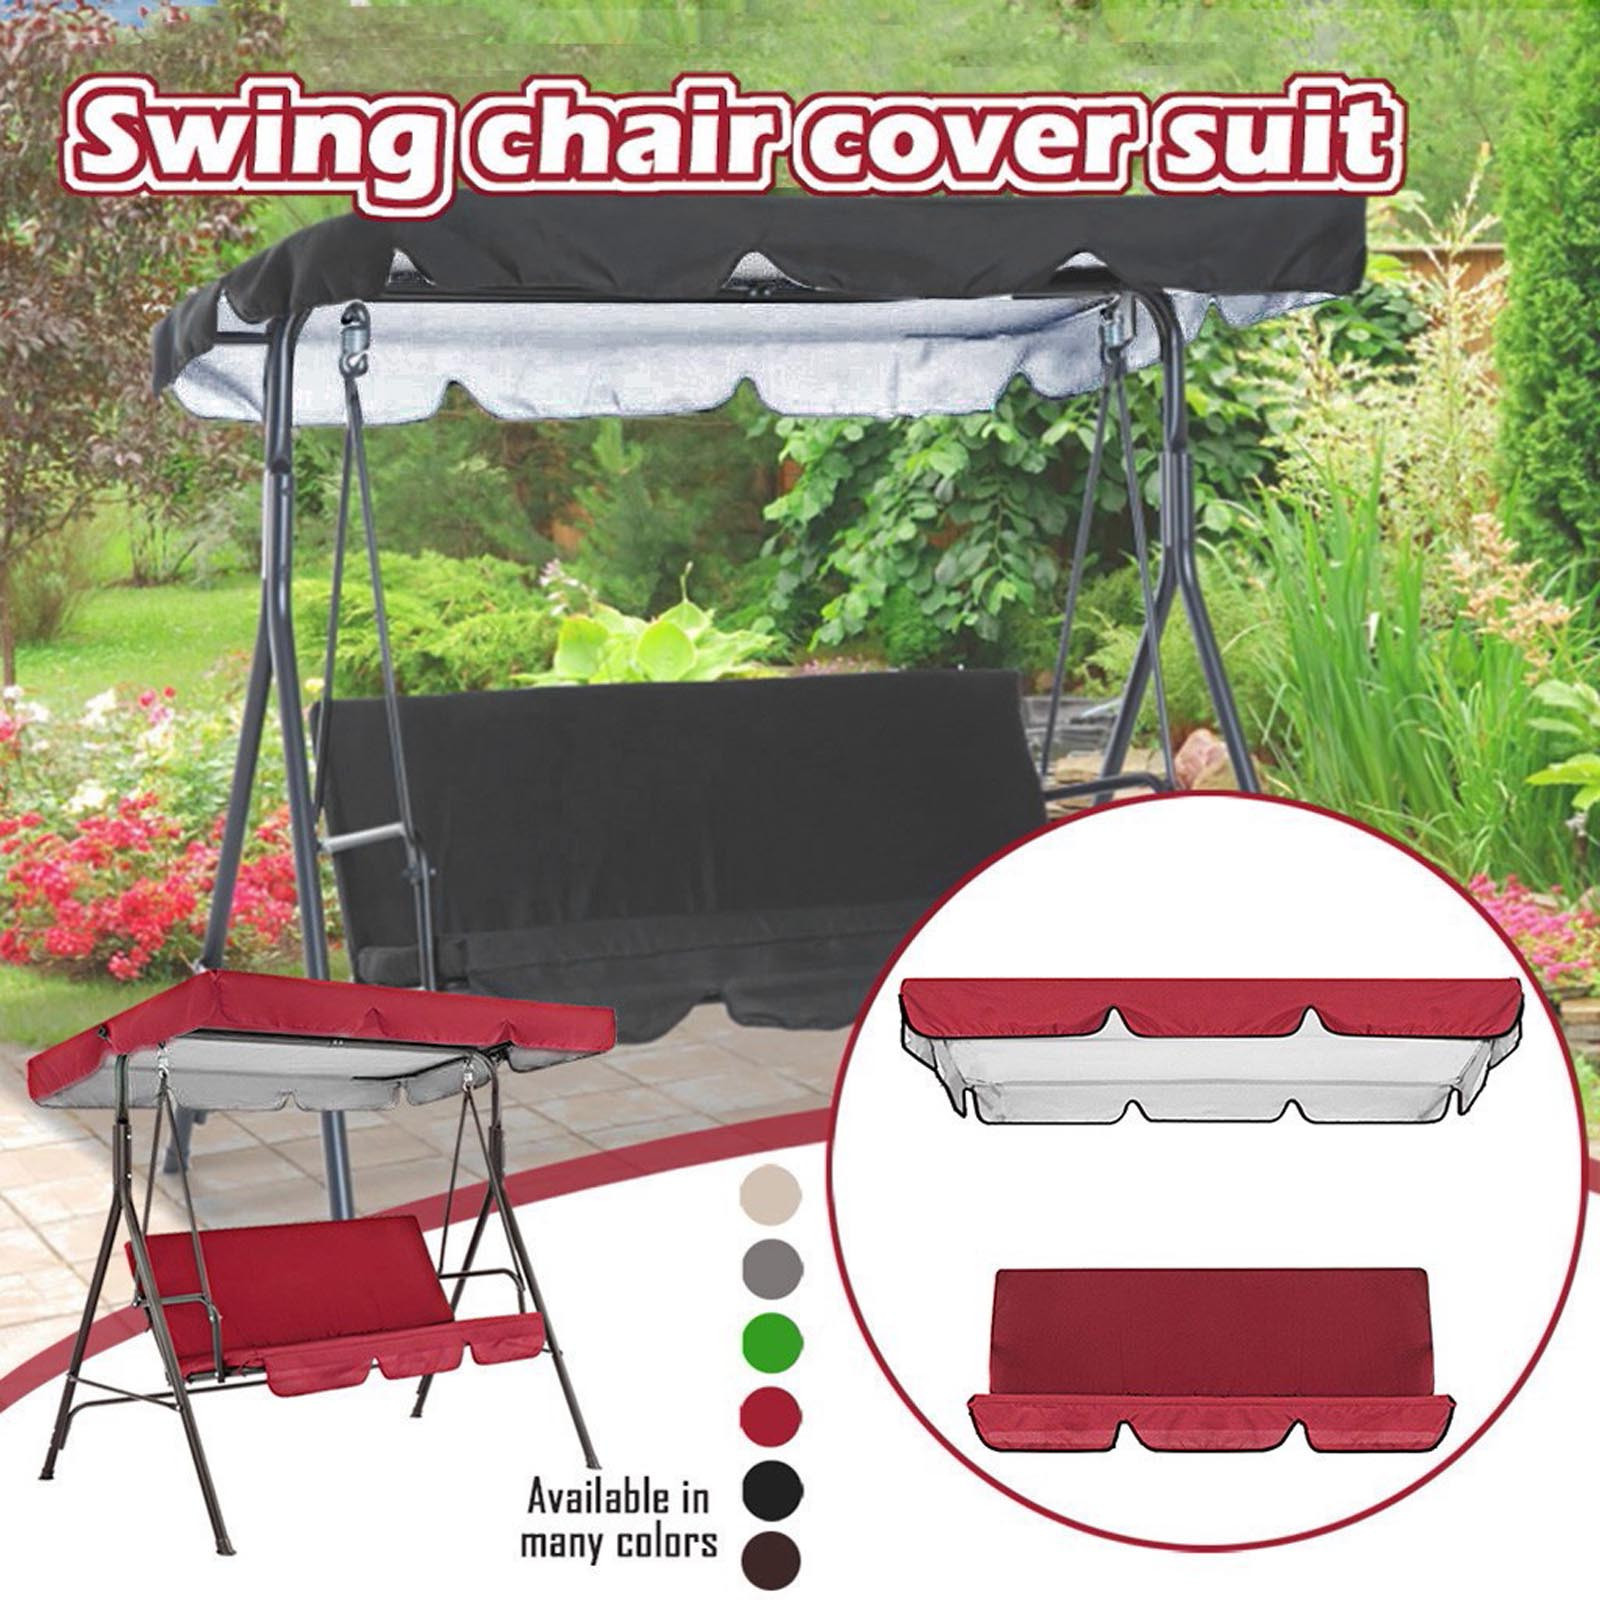 Wovilon Replacement Canopy, Swing Chair Canopy Replacement Swing Canopy Cover Waterproof Garden Swing Chair Canopy Cover for Outdoor Patio Garden Poolside Balcony - image 2 of 2